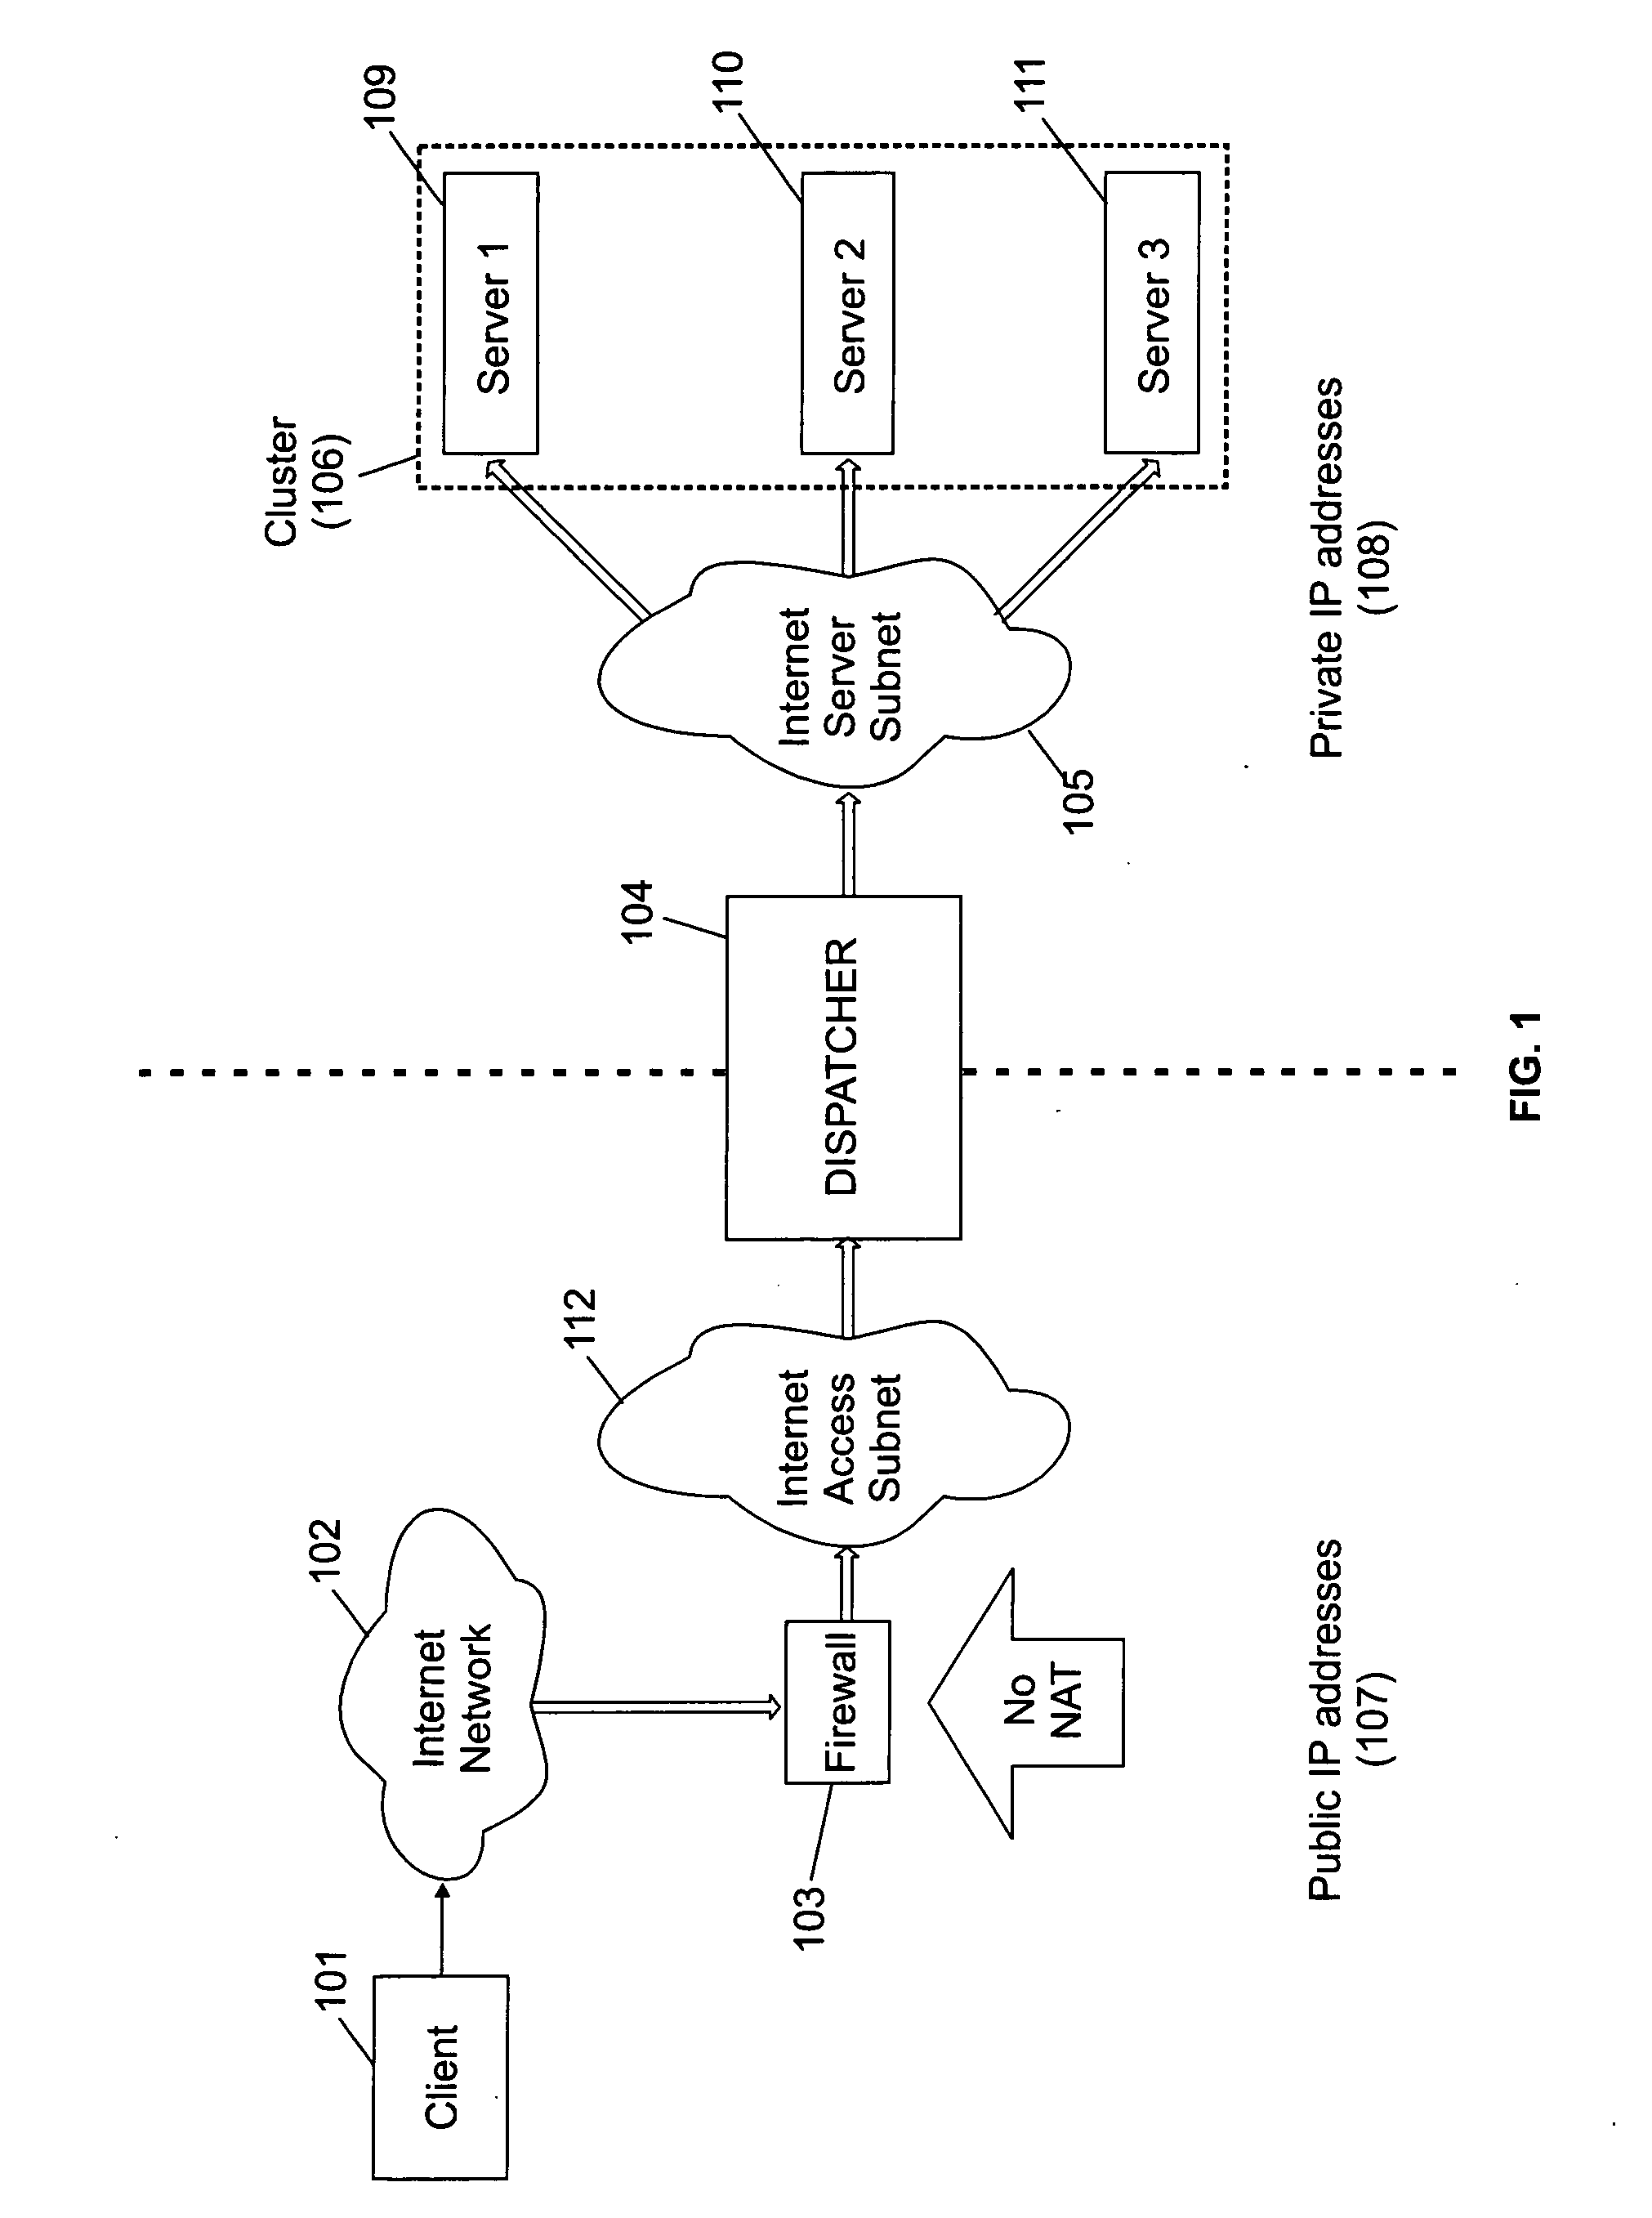 System and method for accessing clusters of servers from the internet network